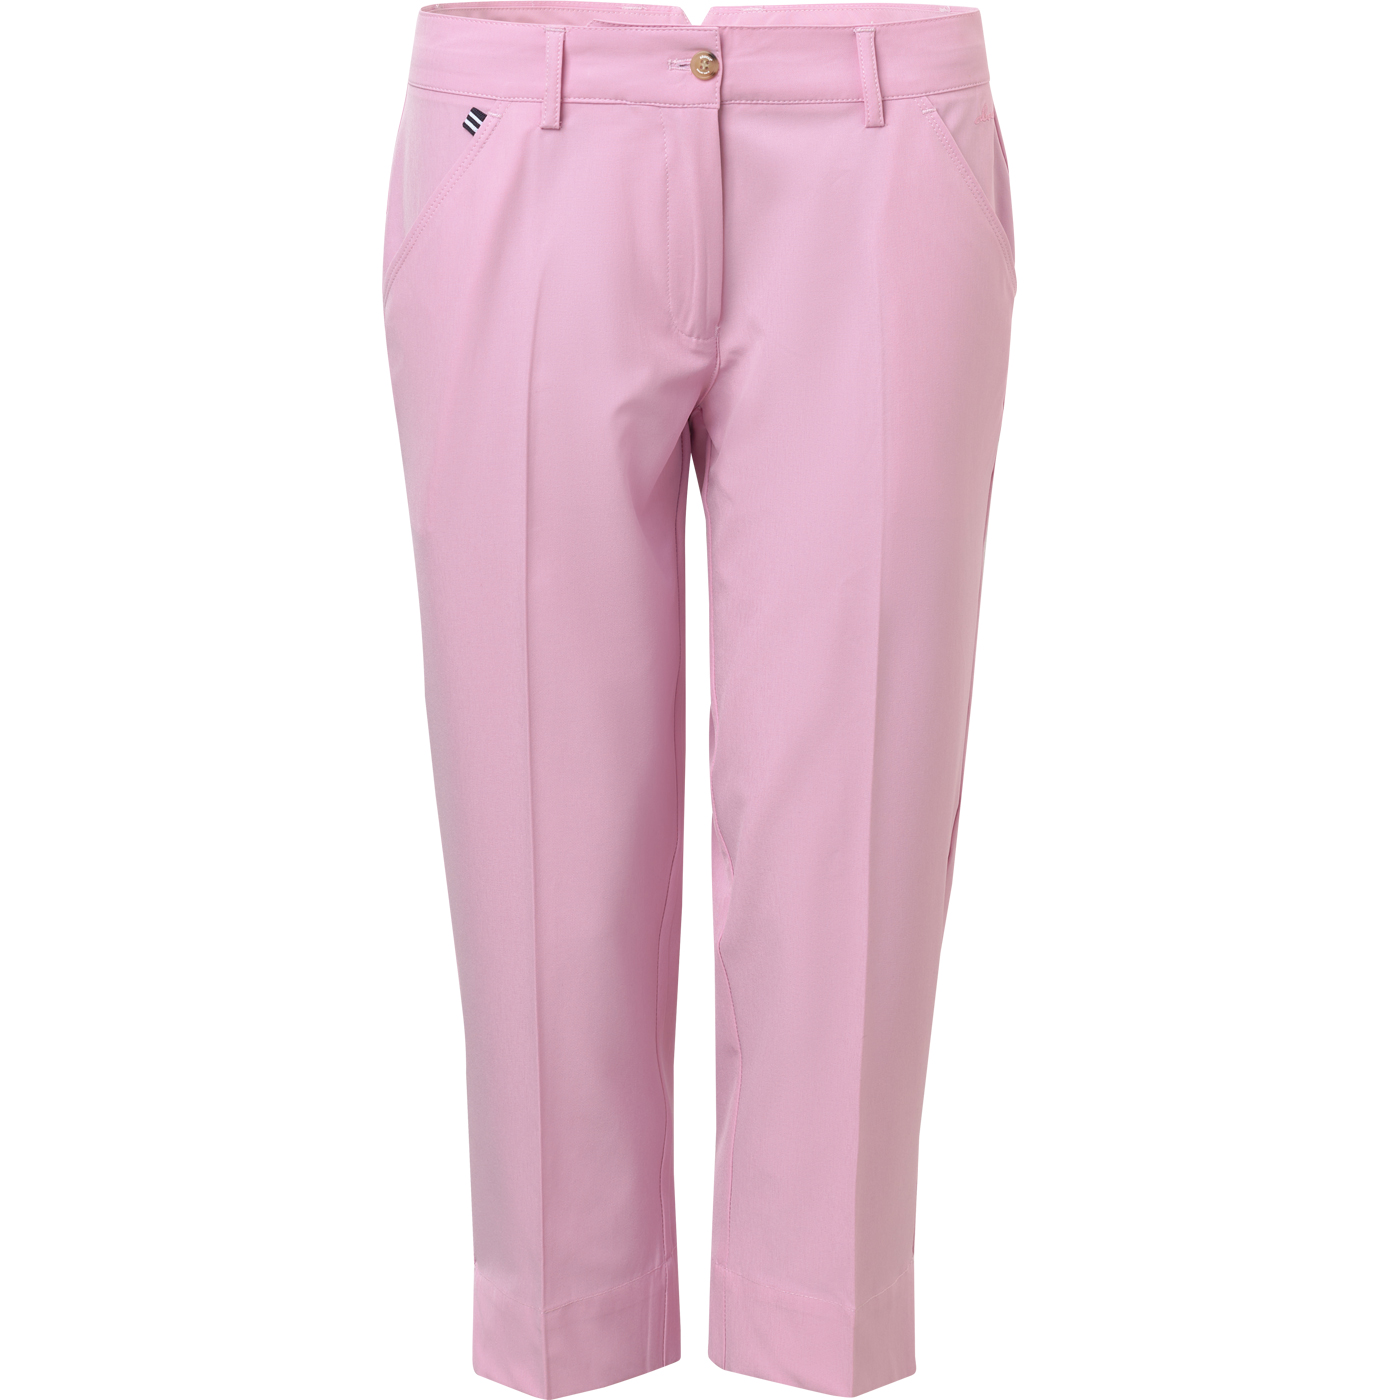 Lds Kildare capri - peony in the group WOMEN / All clothing at Abacus Sportswear (2979390)